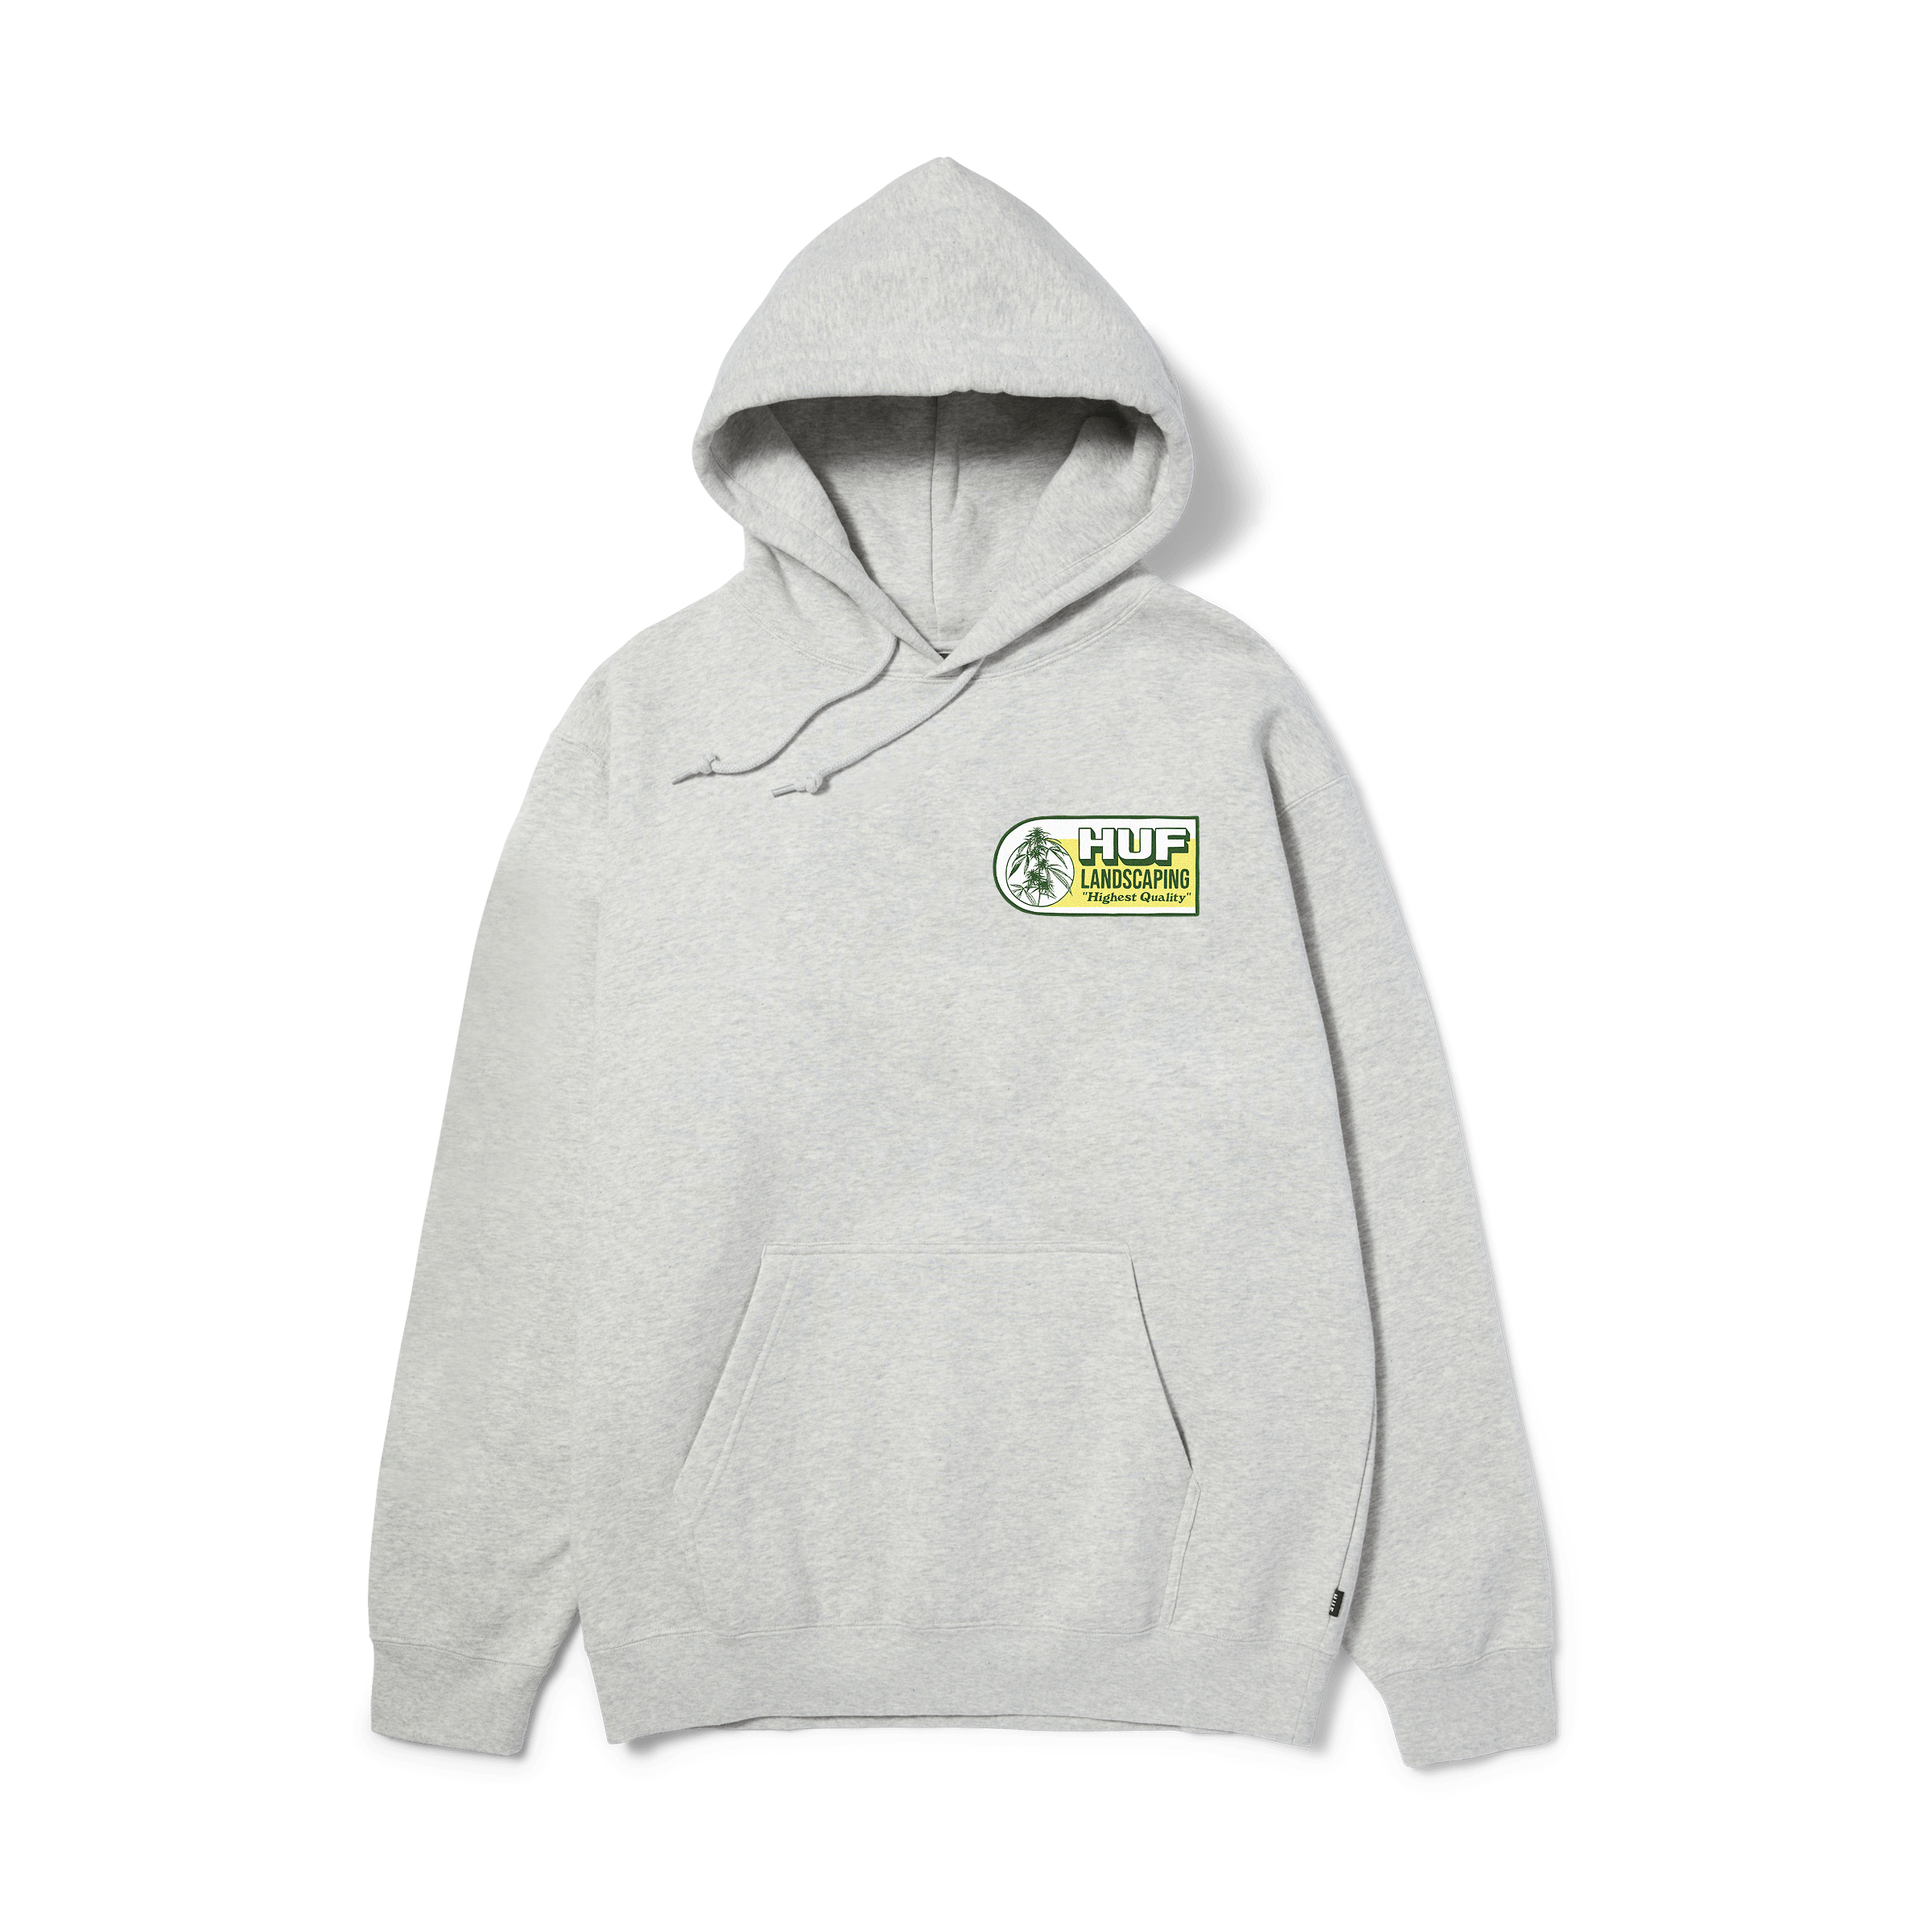 Huf Landscaping Pullover Hoodie